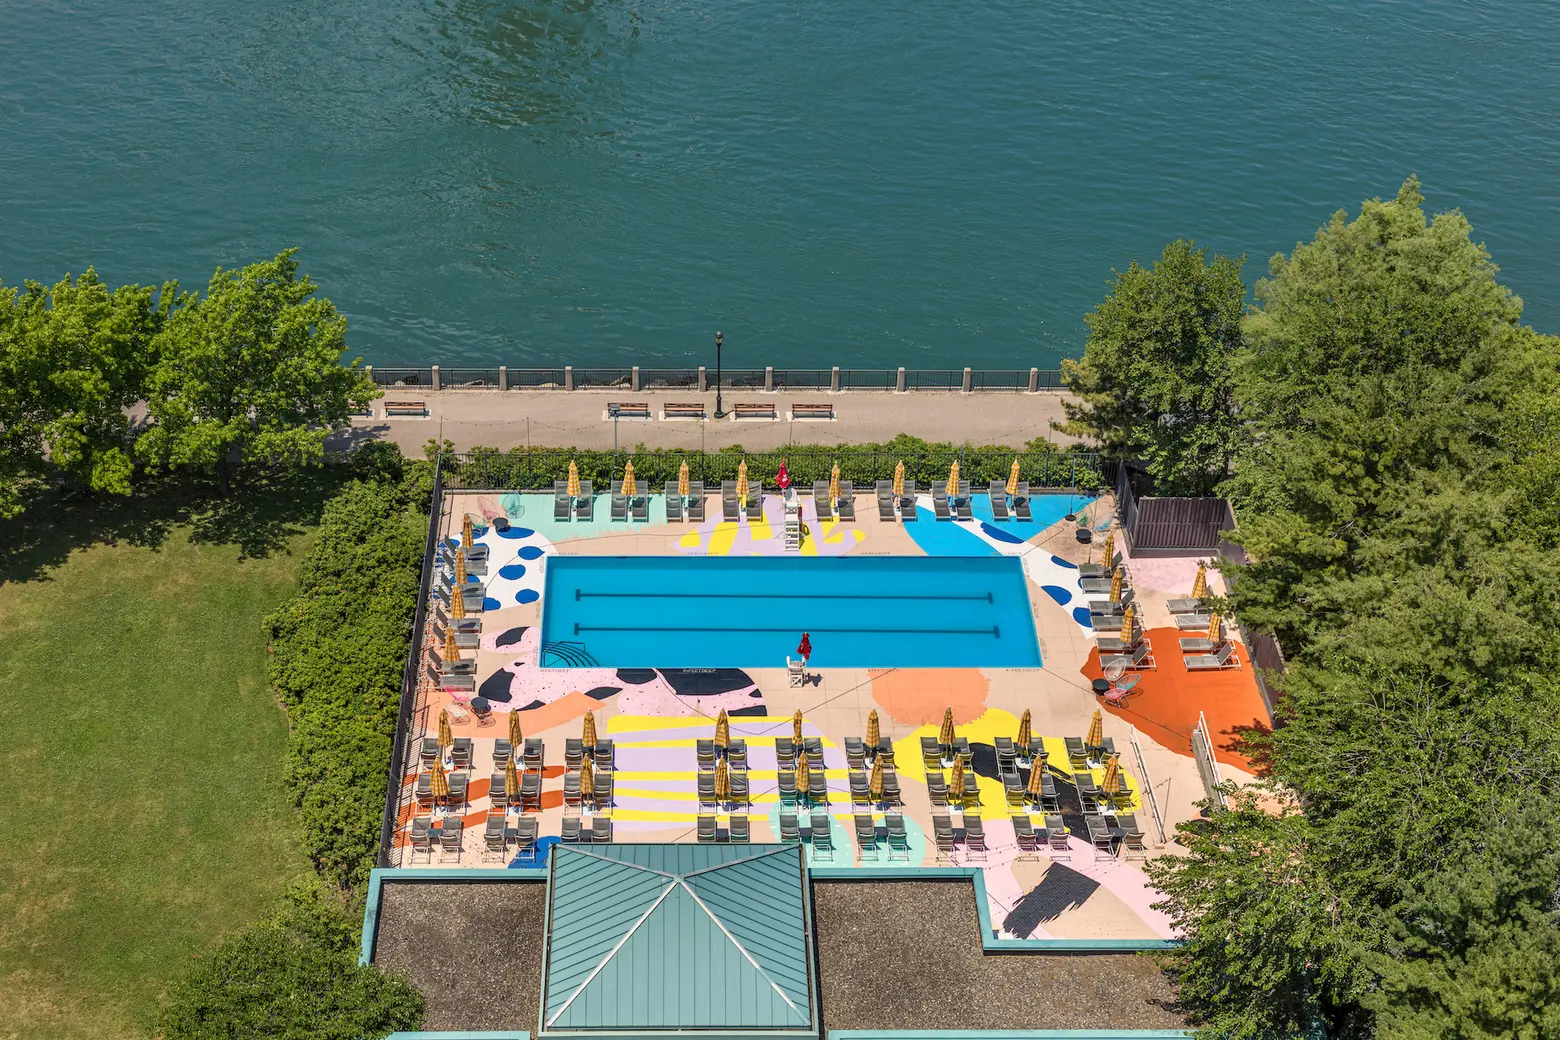 Roosevelt Island’s colorful Manhattan Park Pool Club is back and open to the public